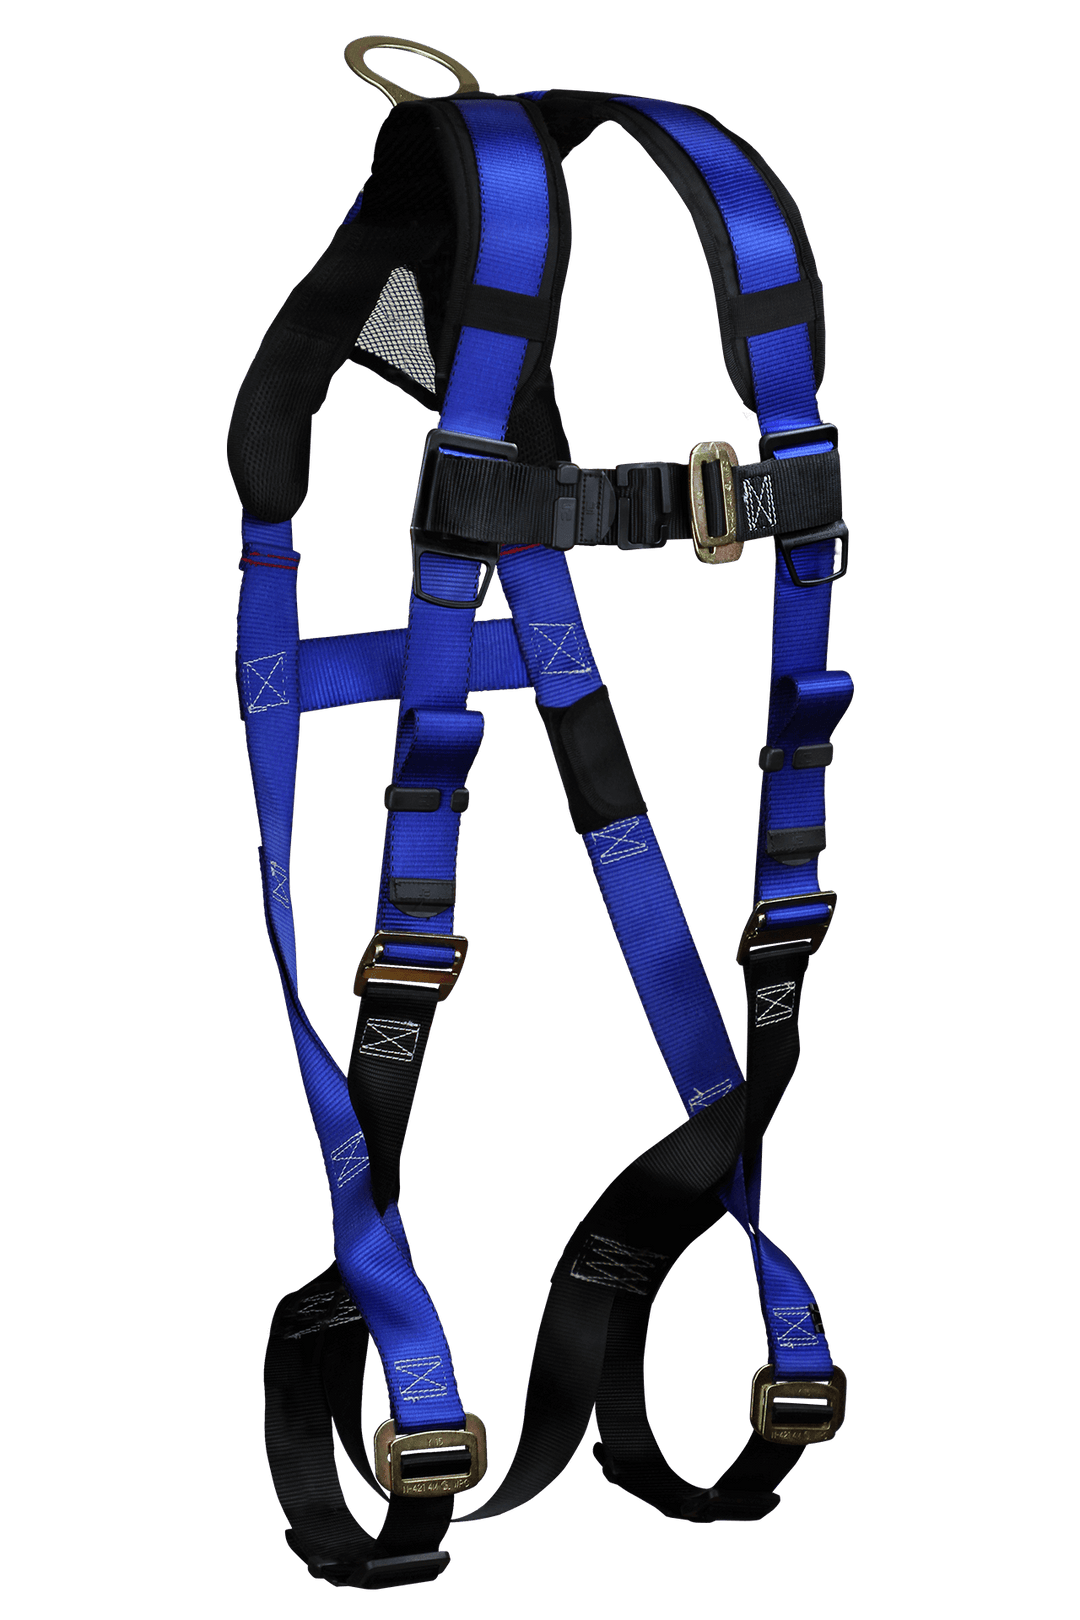 FALLTECH Contractor Plus 1D Standard Non-Belted Harness